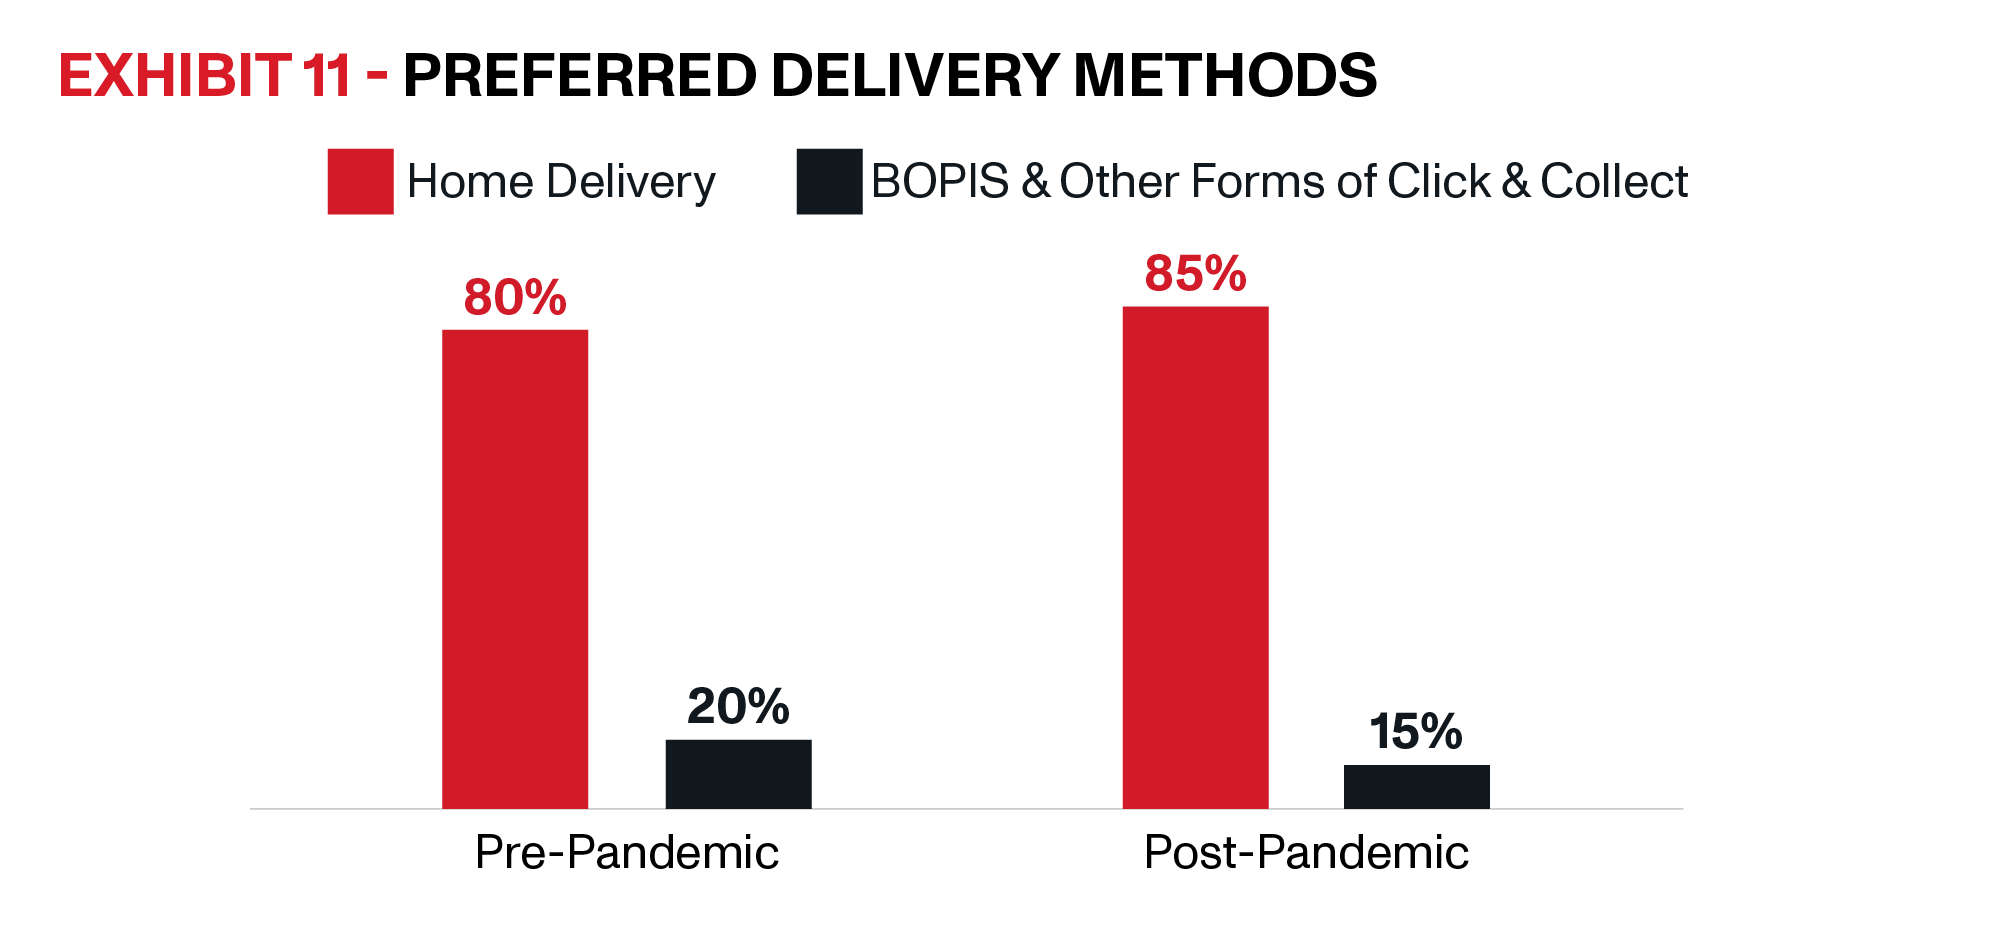 OnTrac | E Commerce Delivery Solutions Whitepaper | Exhibit 11 | Exhibit 11 shows that 85% of consumers prefer home delivery over BOPIS, up 6% compared to pre-pandemic.